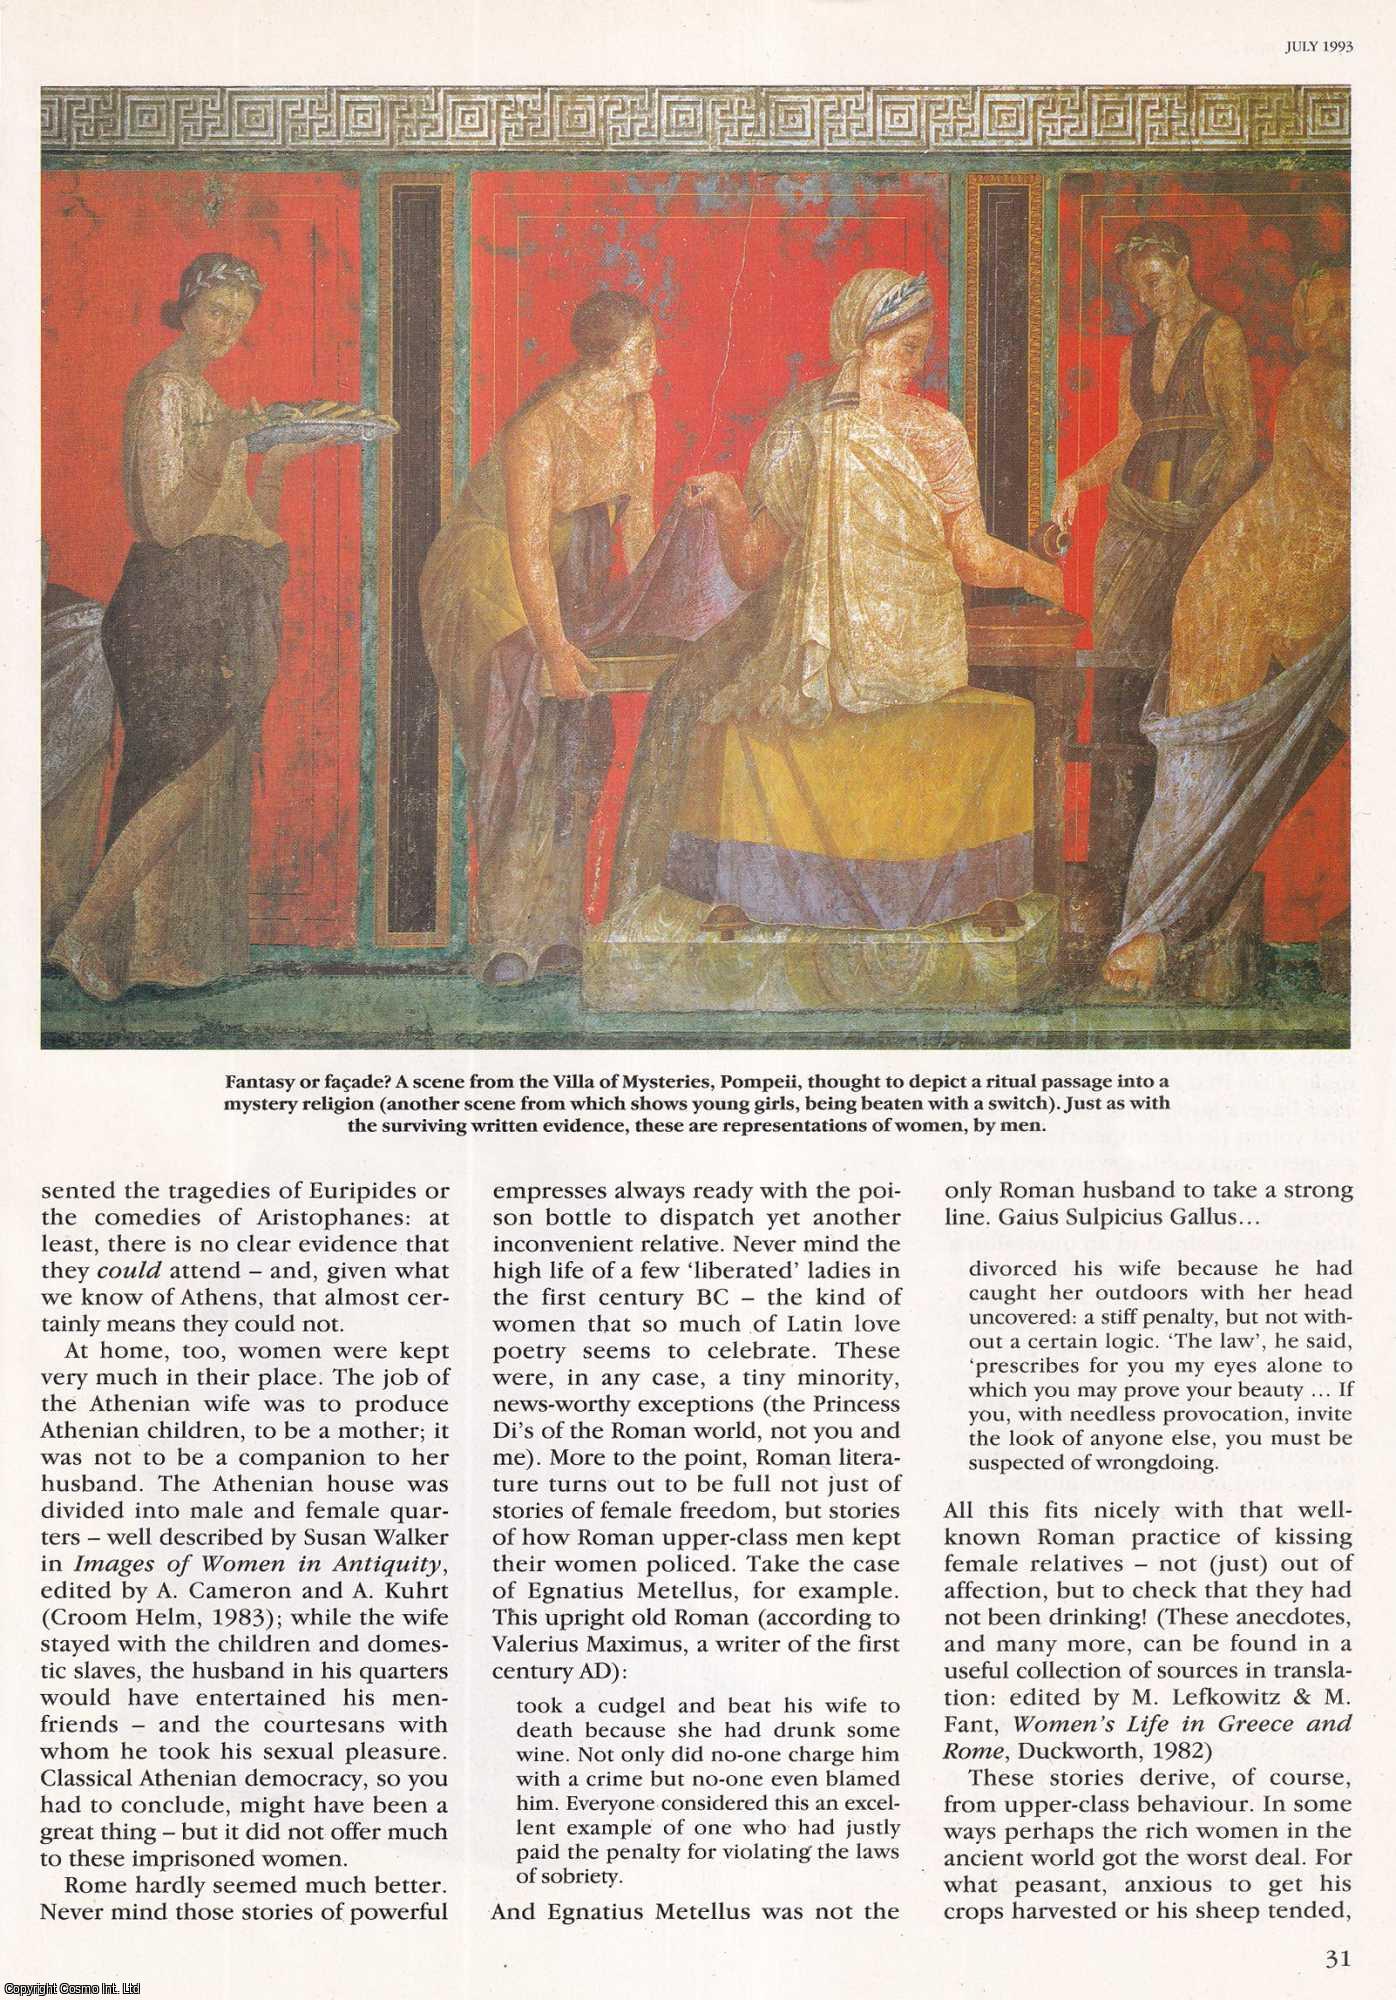 Mary Beard - What Life was Like for Women in Greece and Rome: The Classic Woman? An original article from History Today, 1993.